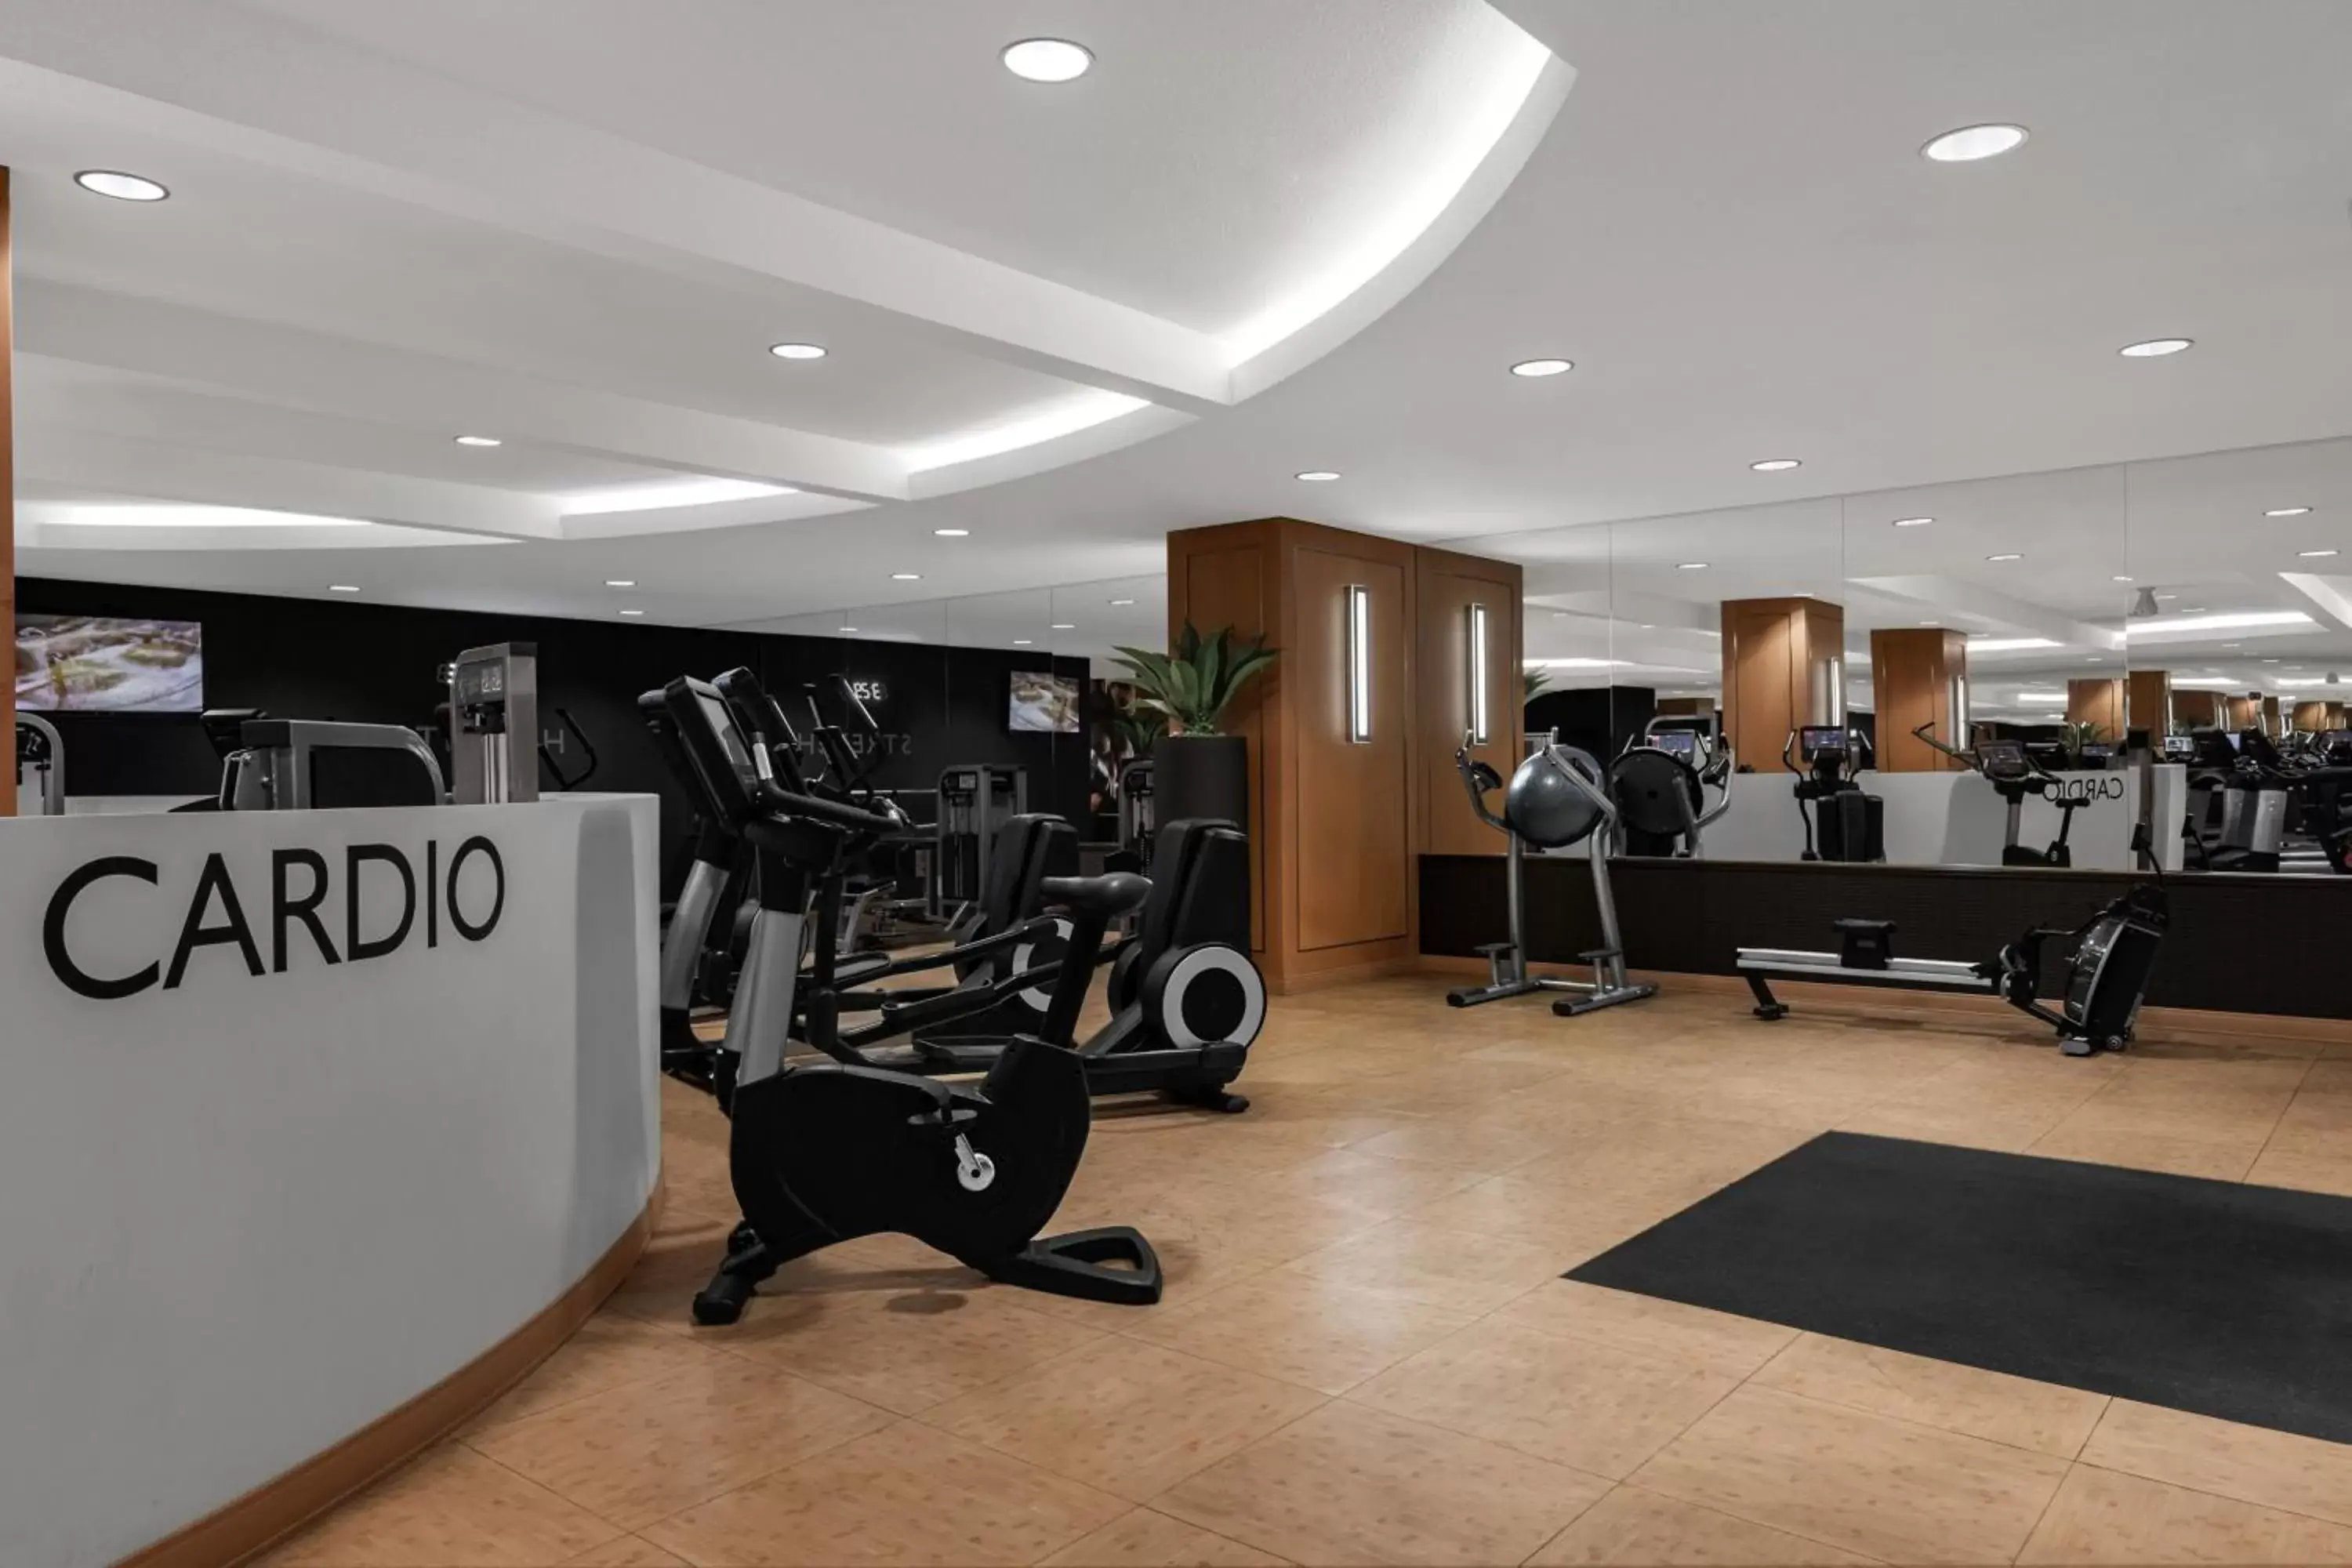 Fitness centre/facilities, Fitness Center/Facilities in Marriott's Grand Chateau